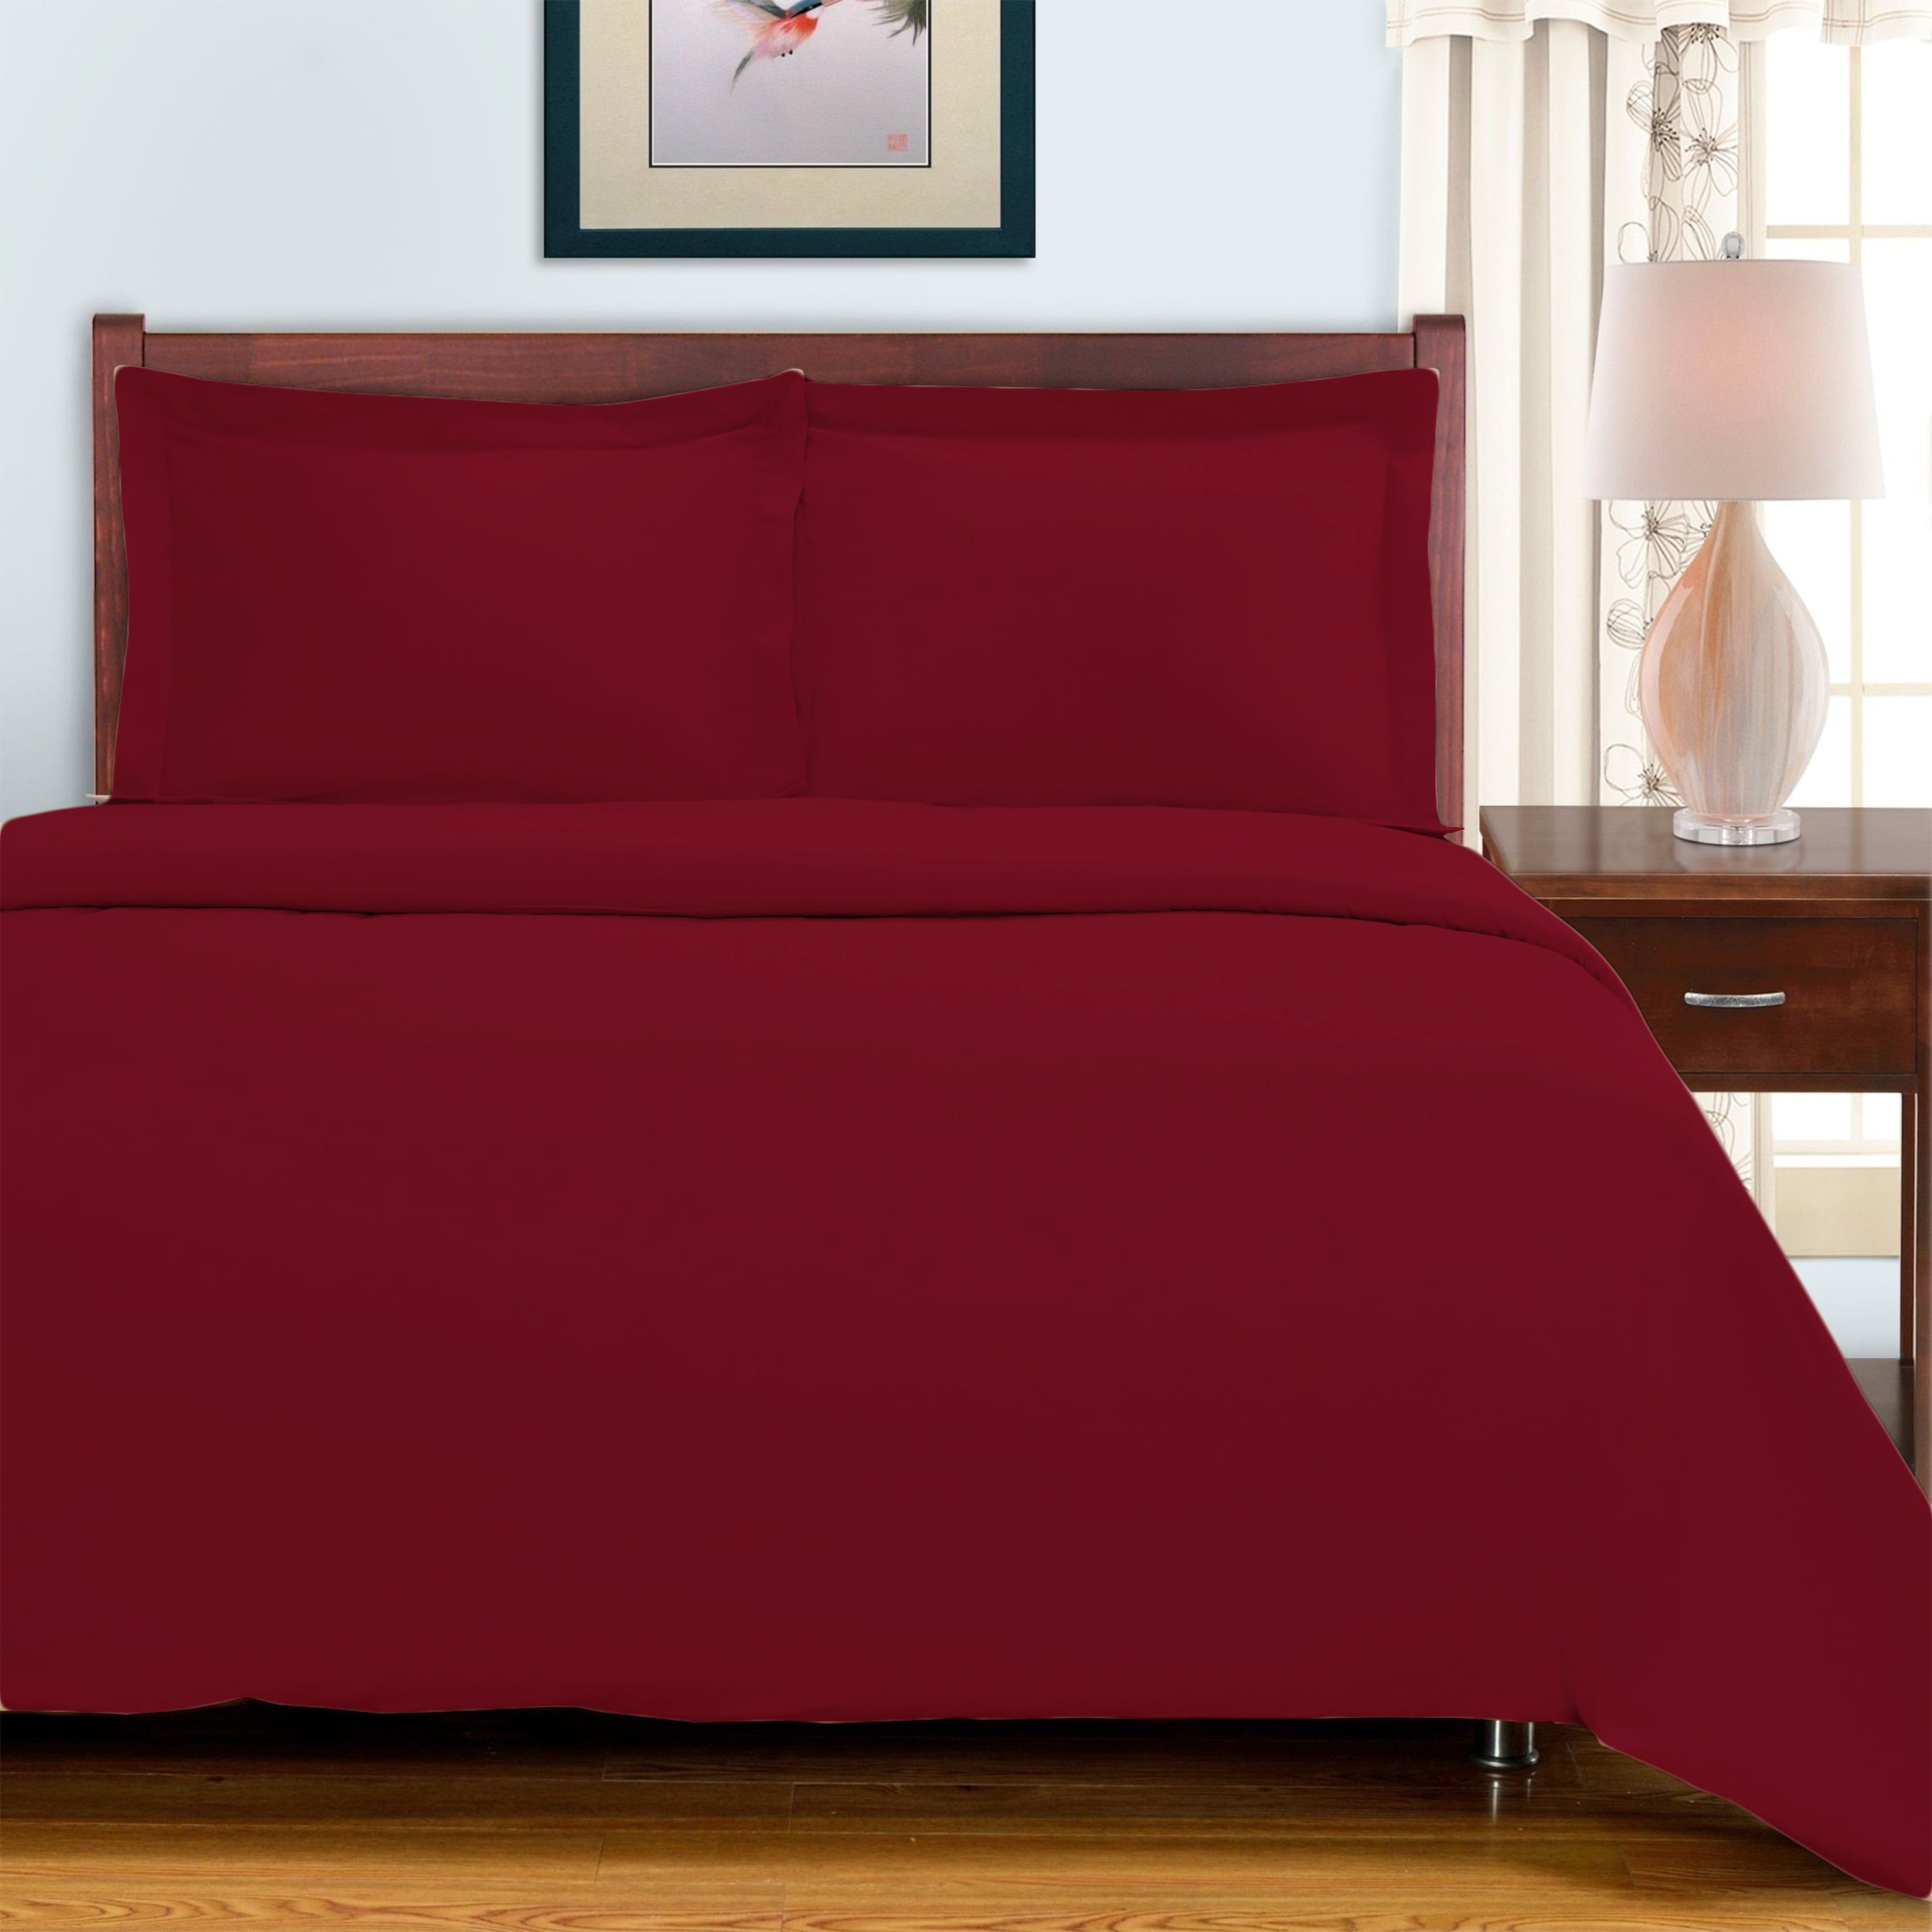 Details about   Egyptian Cotton 1000 Thread Count All Bedding Items RV King Size & Solid Colors 